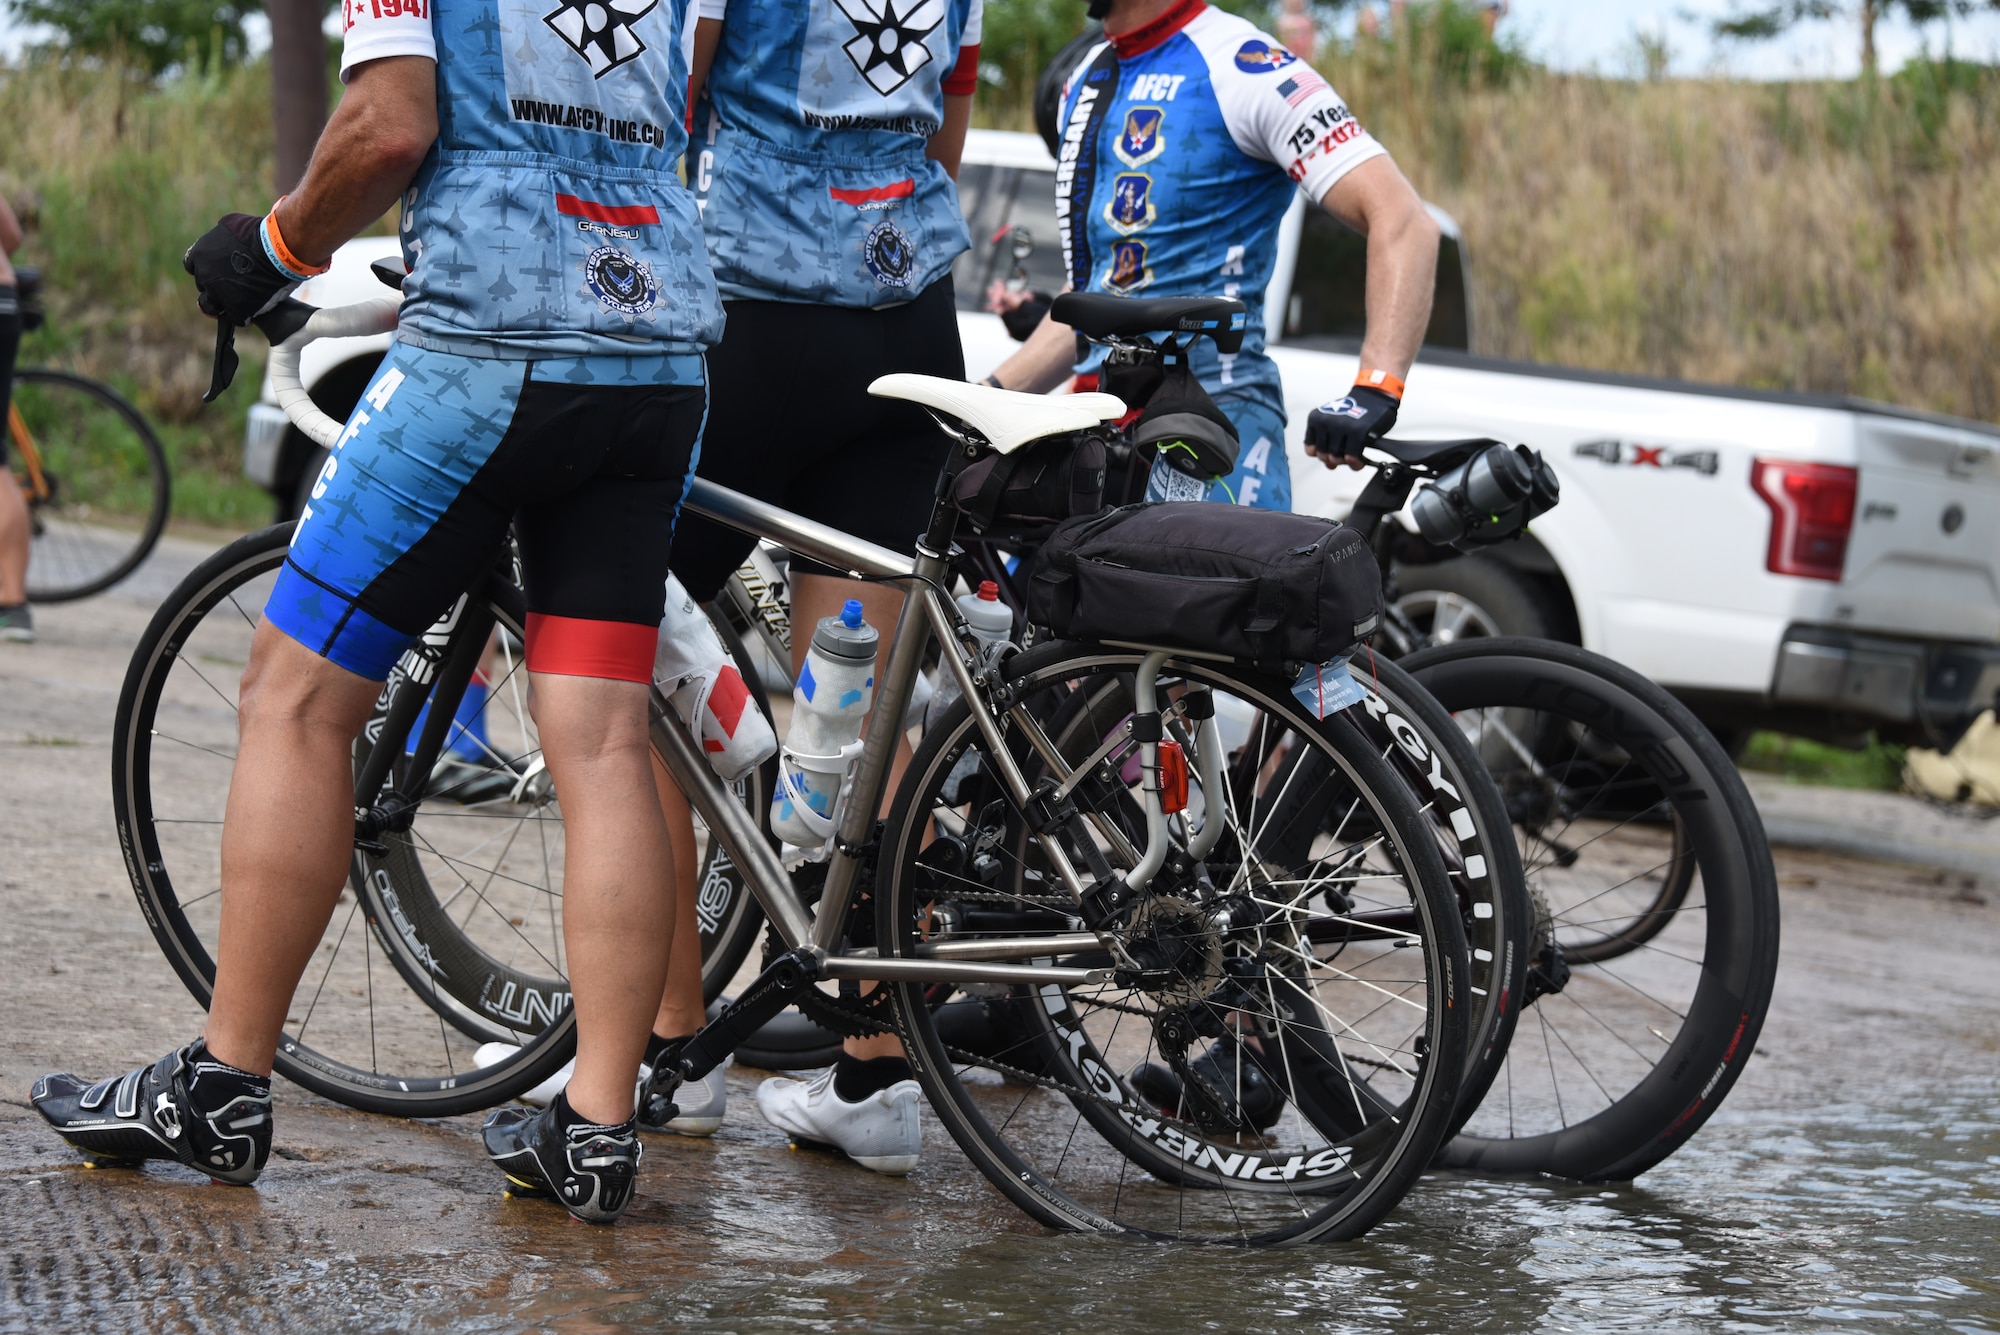 AFTC members dip their bicycle tires into water